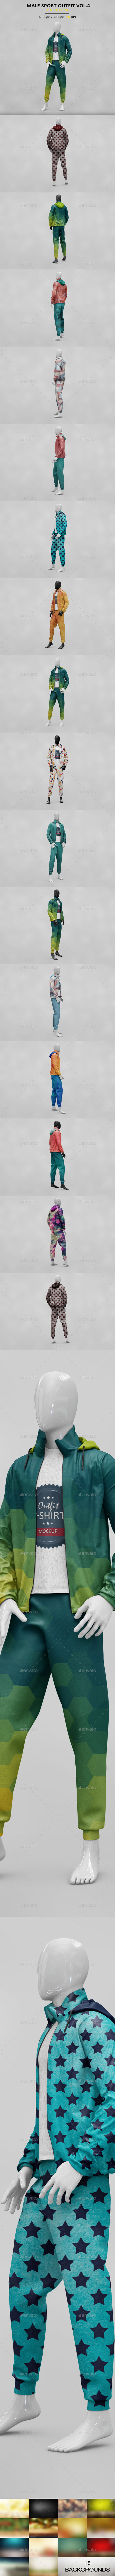 Male Sport Outfit MockUp